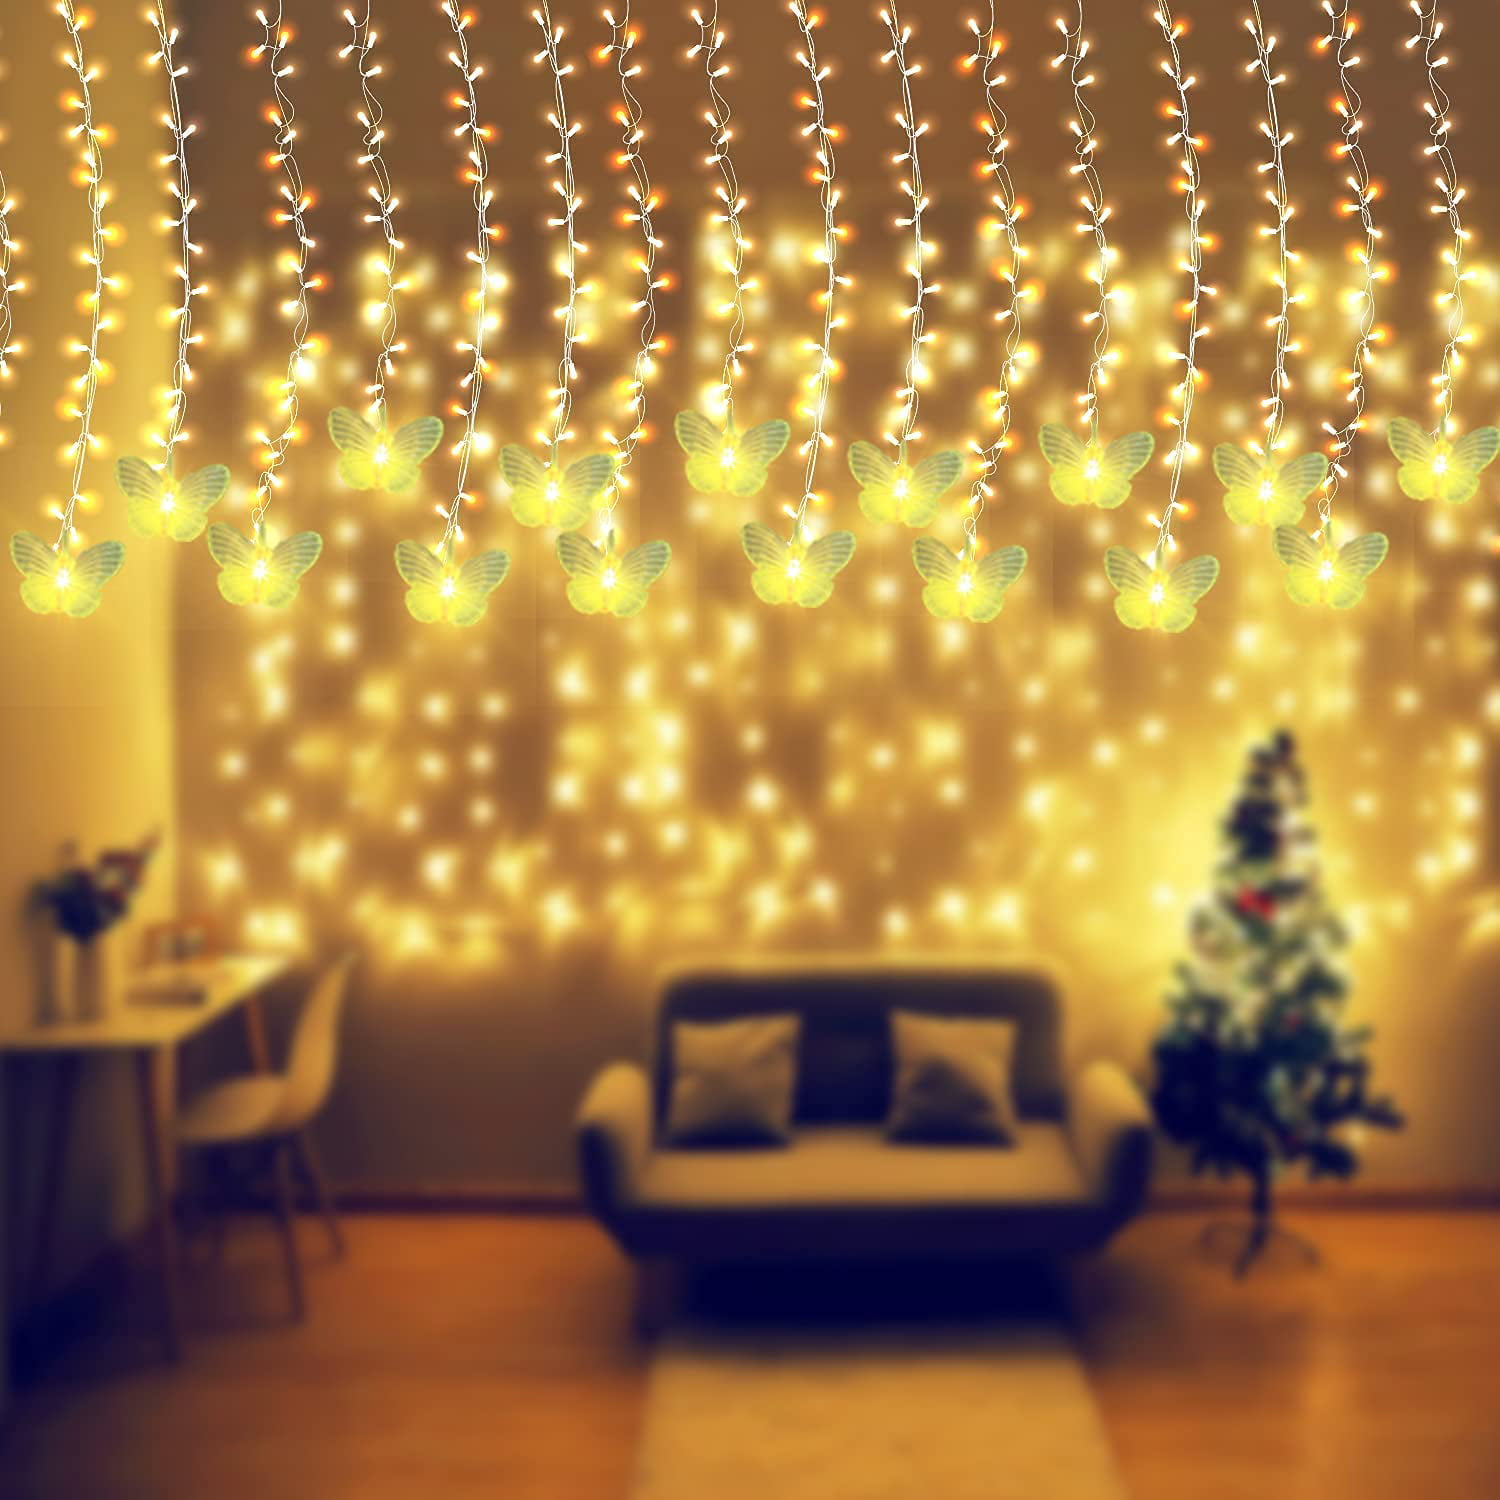 Battery Operated LED Twinkle Lights 50pcs LED Indoor Fairy Lights Warm White for Patio Wedding Bedroom Princess Castle Garden Birthday Party Indoor Outdoor Decoration LiyuanQ FS-D010 Star String Lights